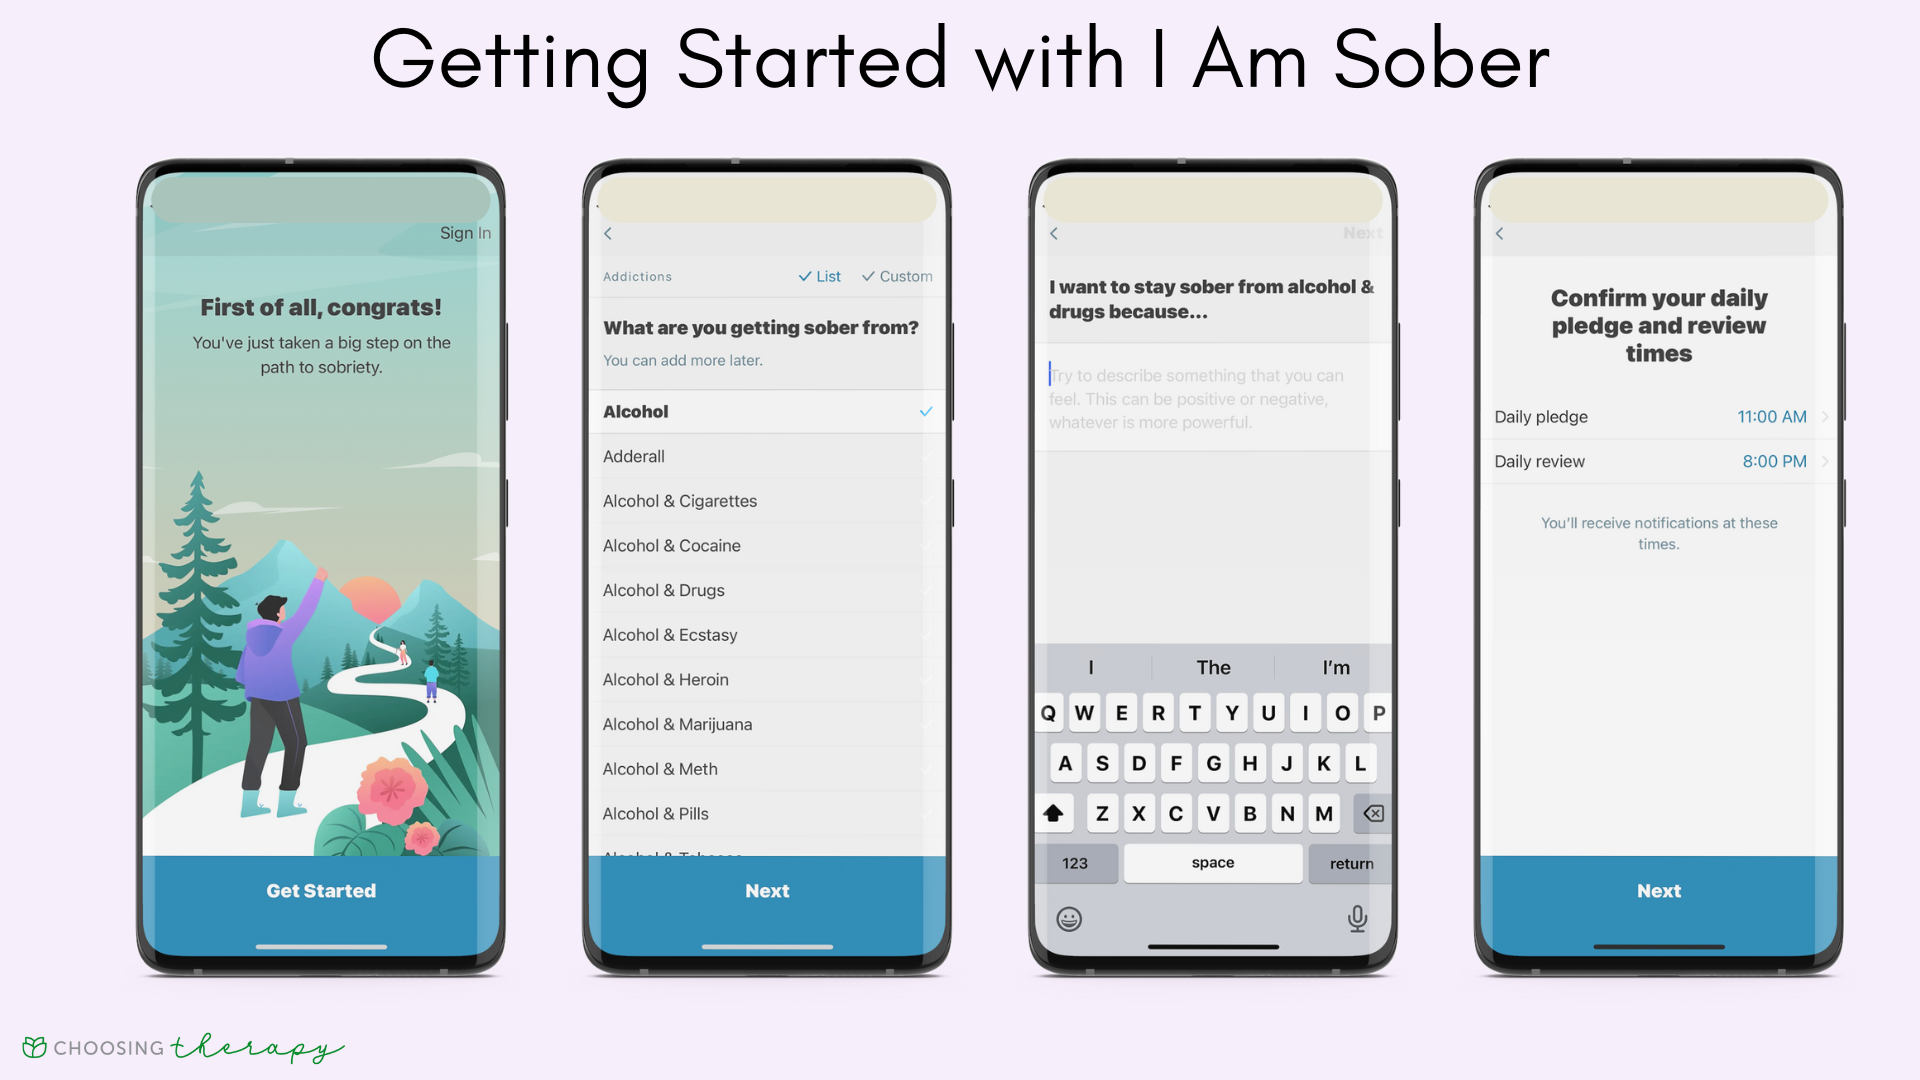 I Am Sober app review 2022 - four images showing how to get started